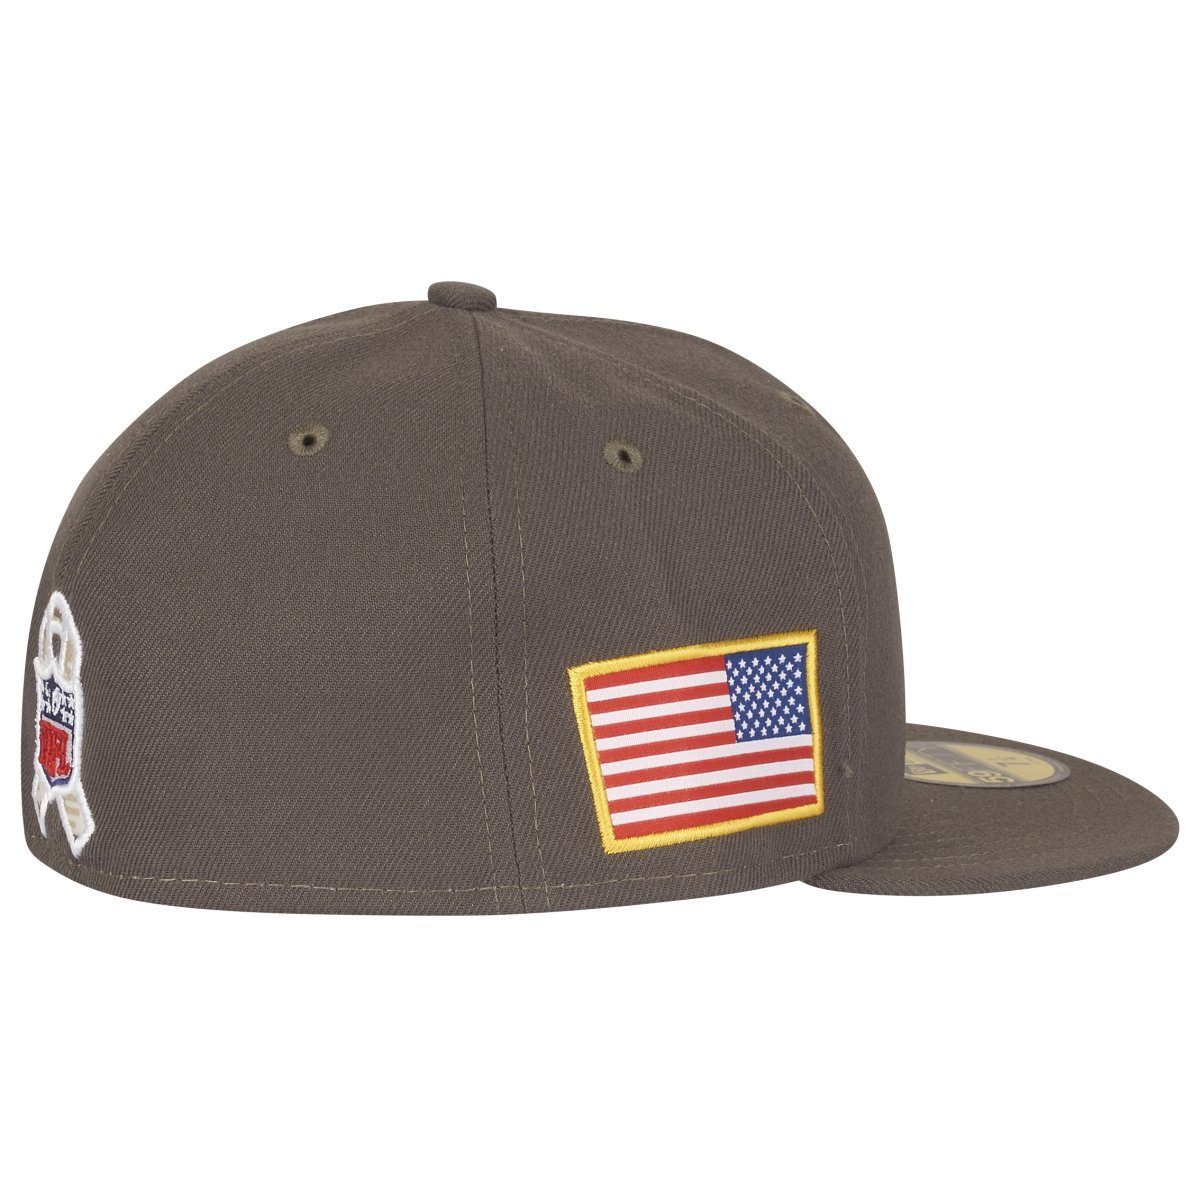 Era Cap Patriots Fitted England 59Fifty Salute to New New Service